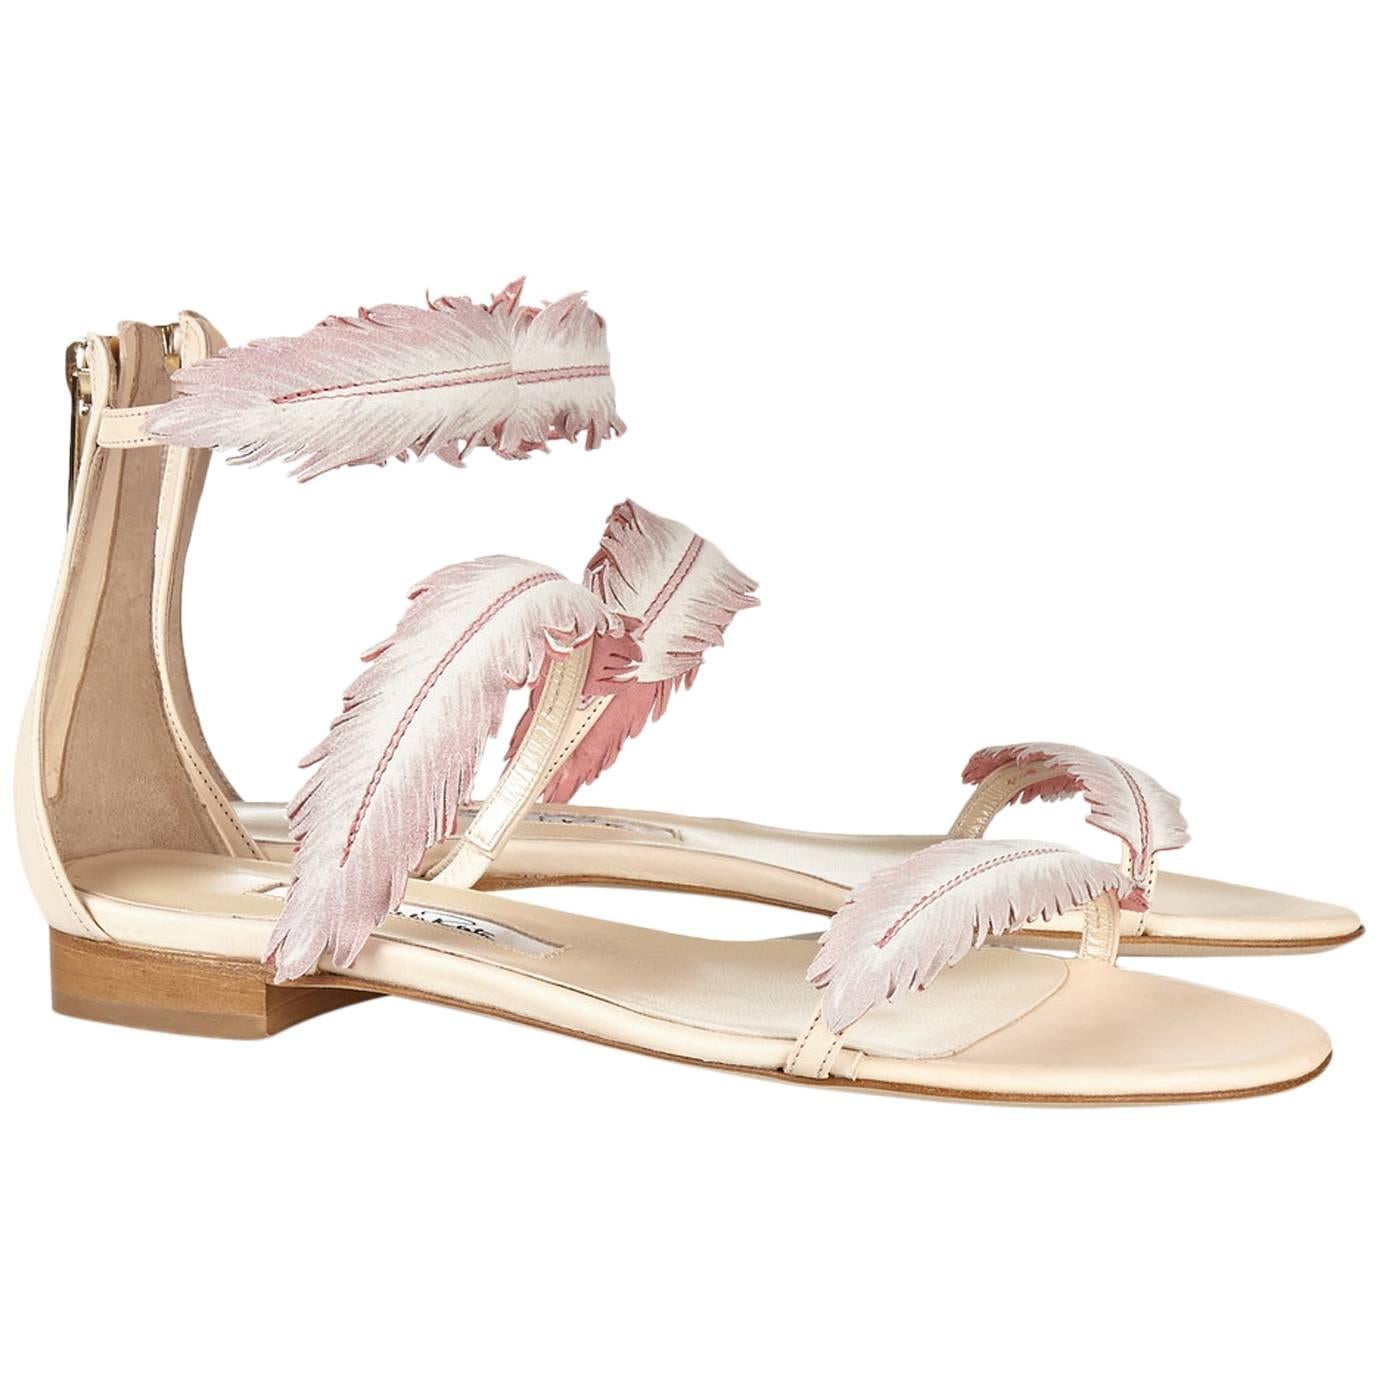 Oscar de la Renta NEW & SOLD OUT Cream Pink Leather Sandals Flats Shoes in Box